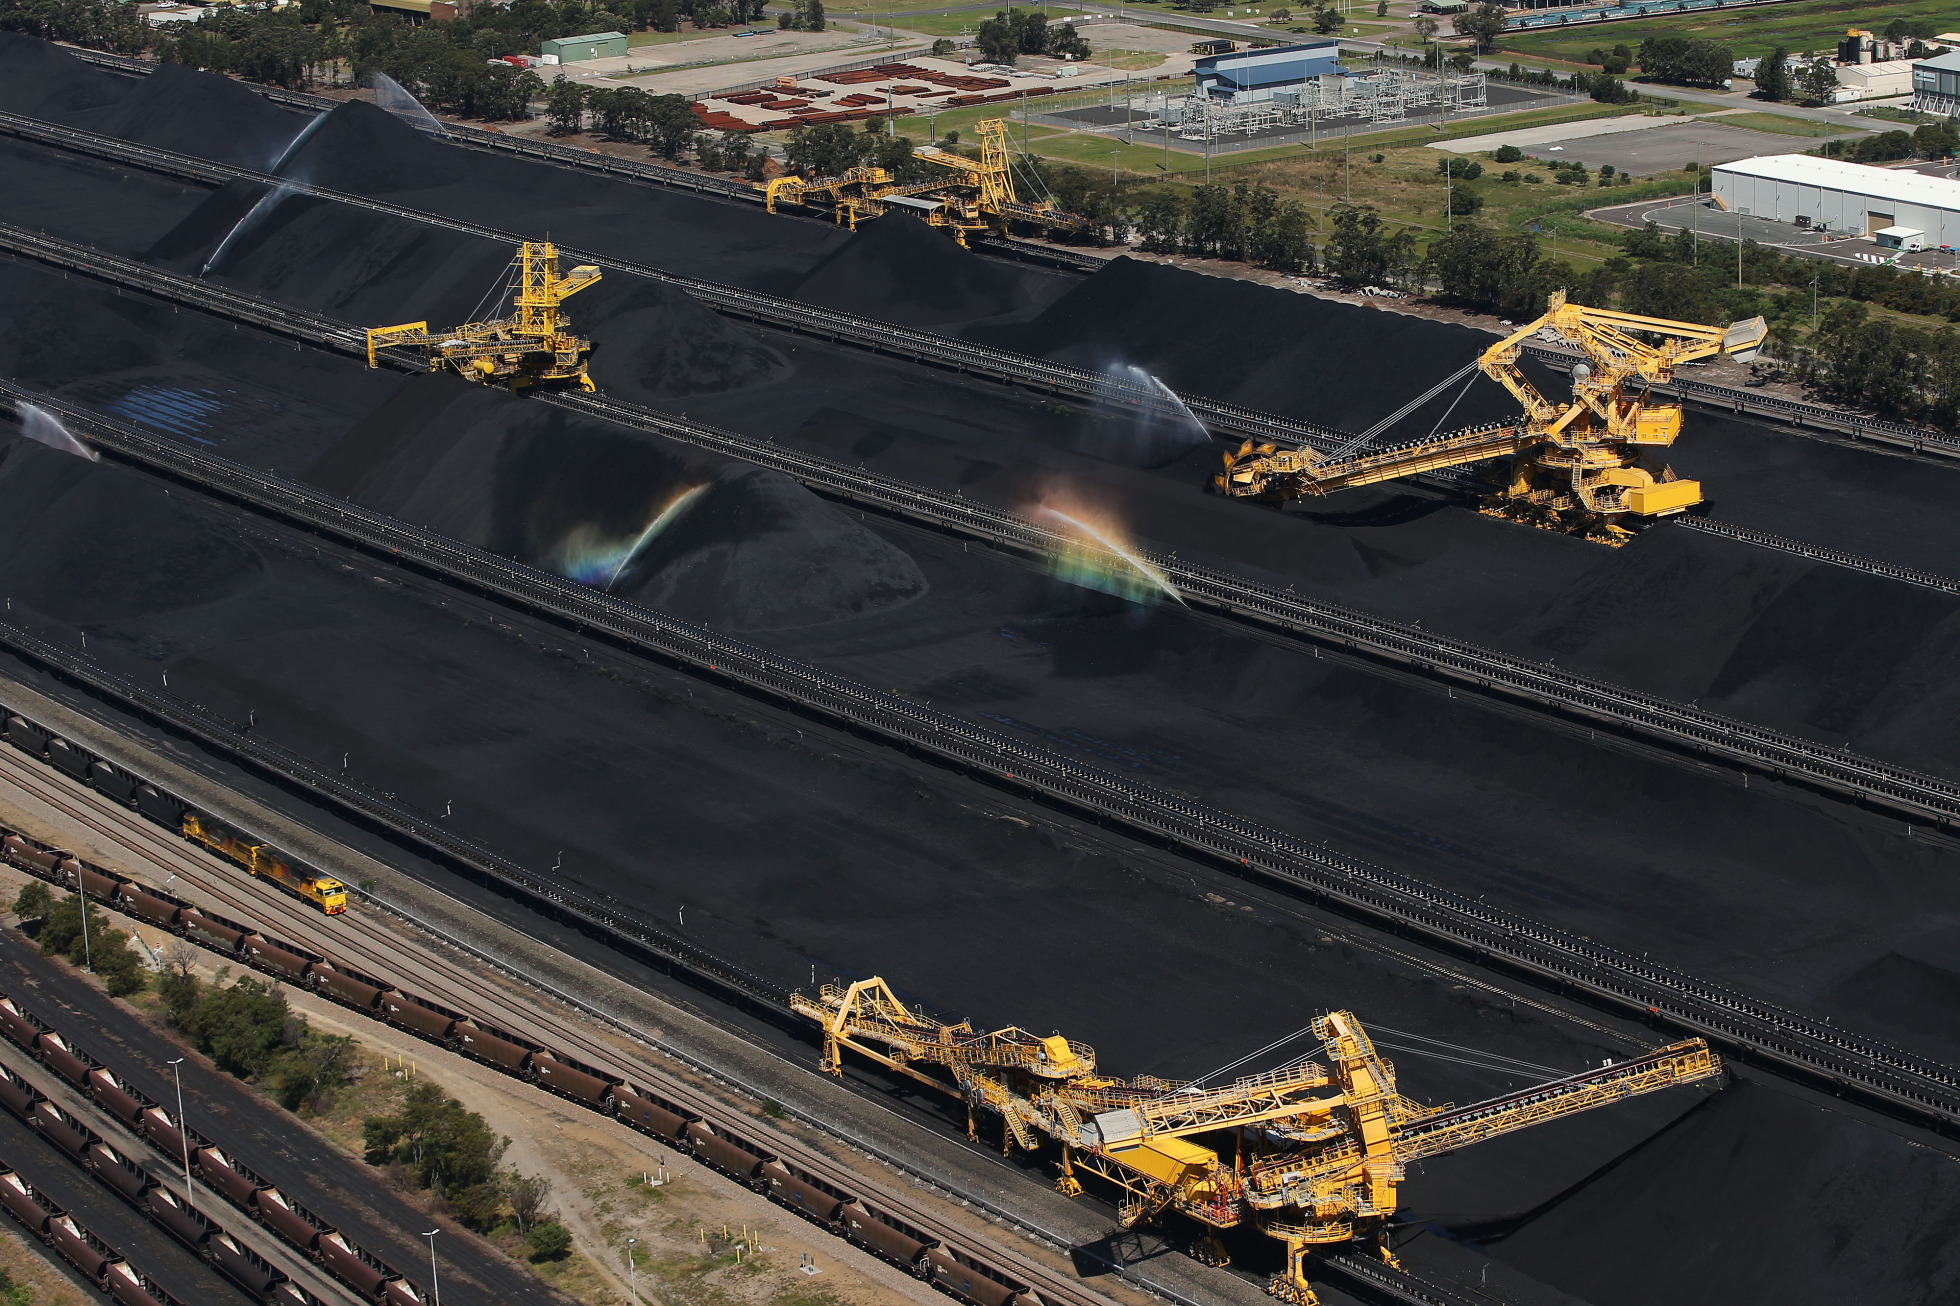 Activist Bluebell Capital charts plan for Glencore coal spin-off